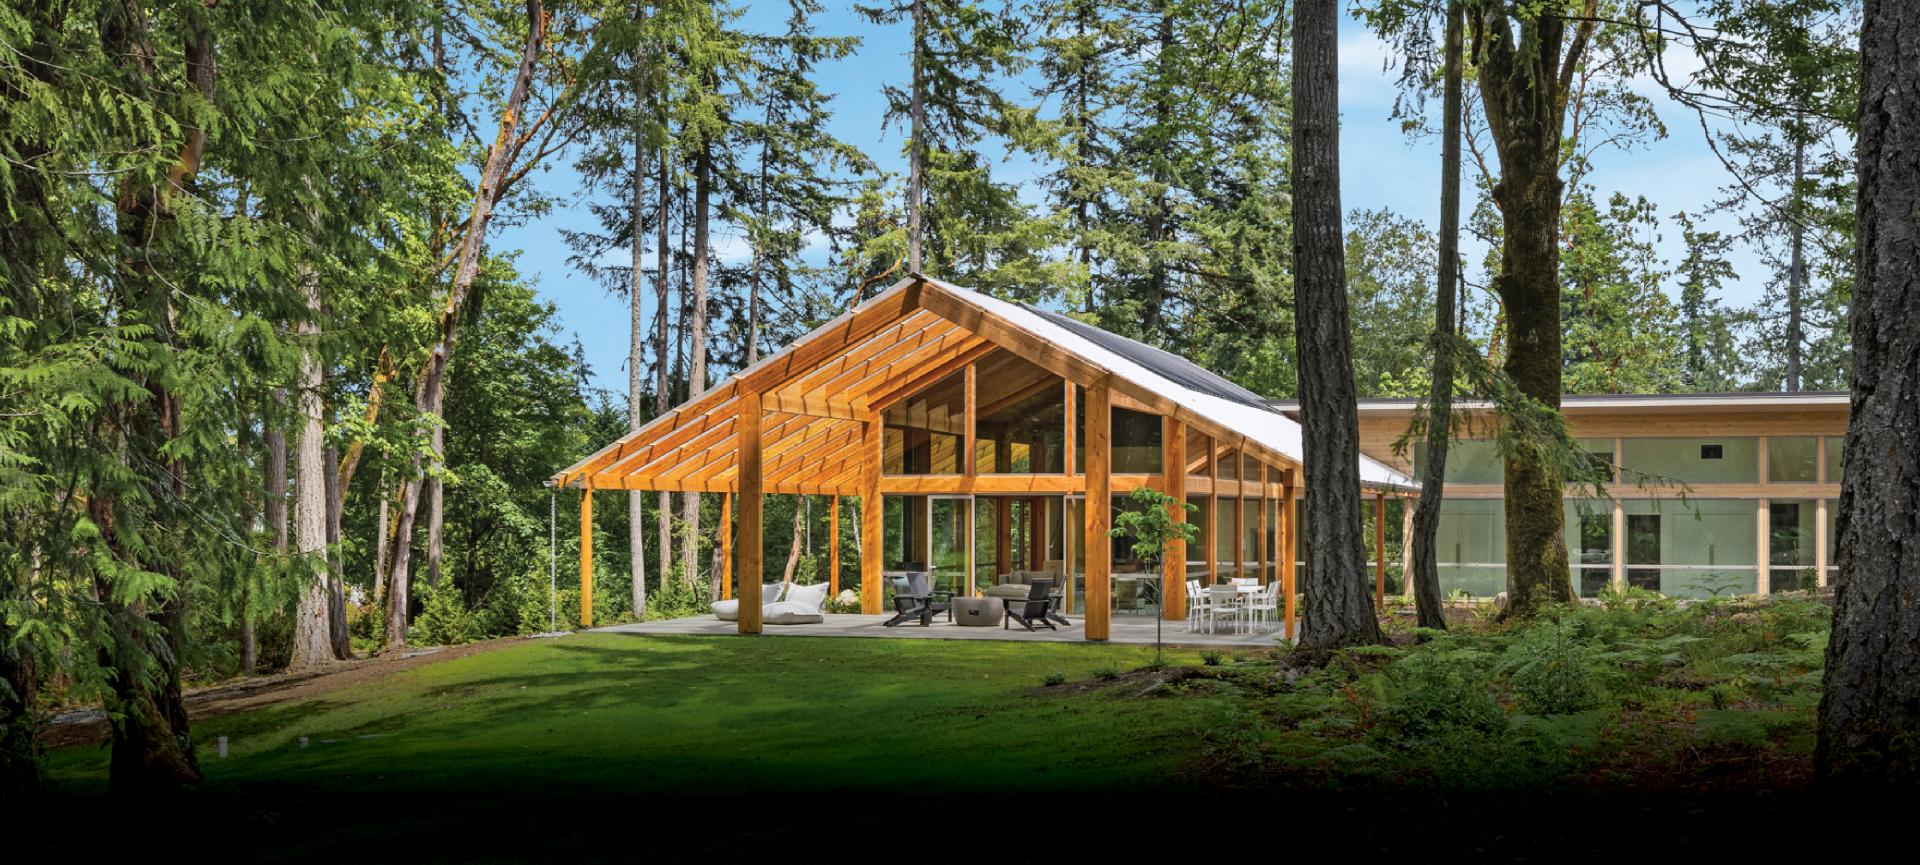 New Energy Works Timber Frame Home